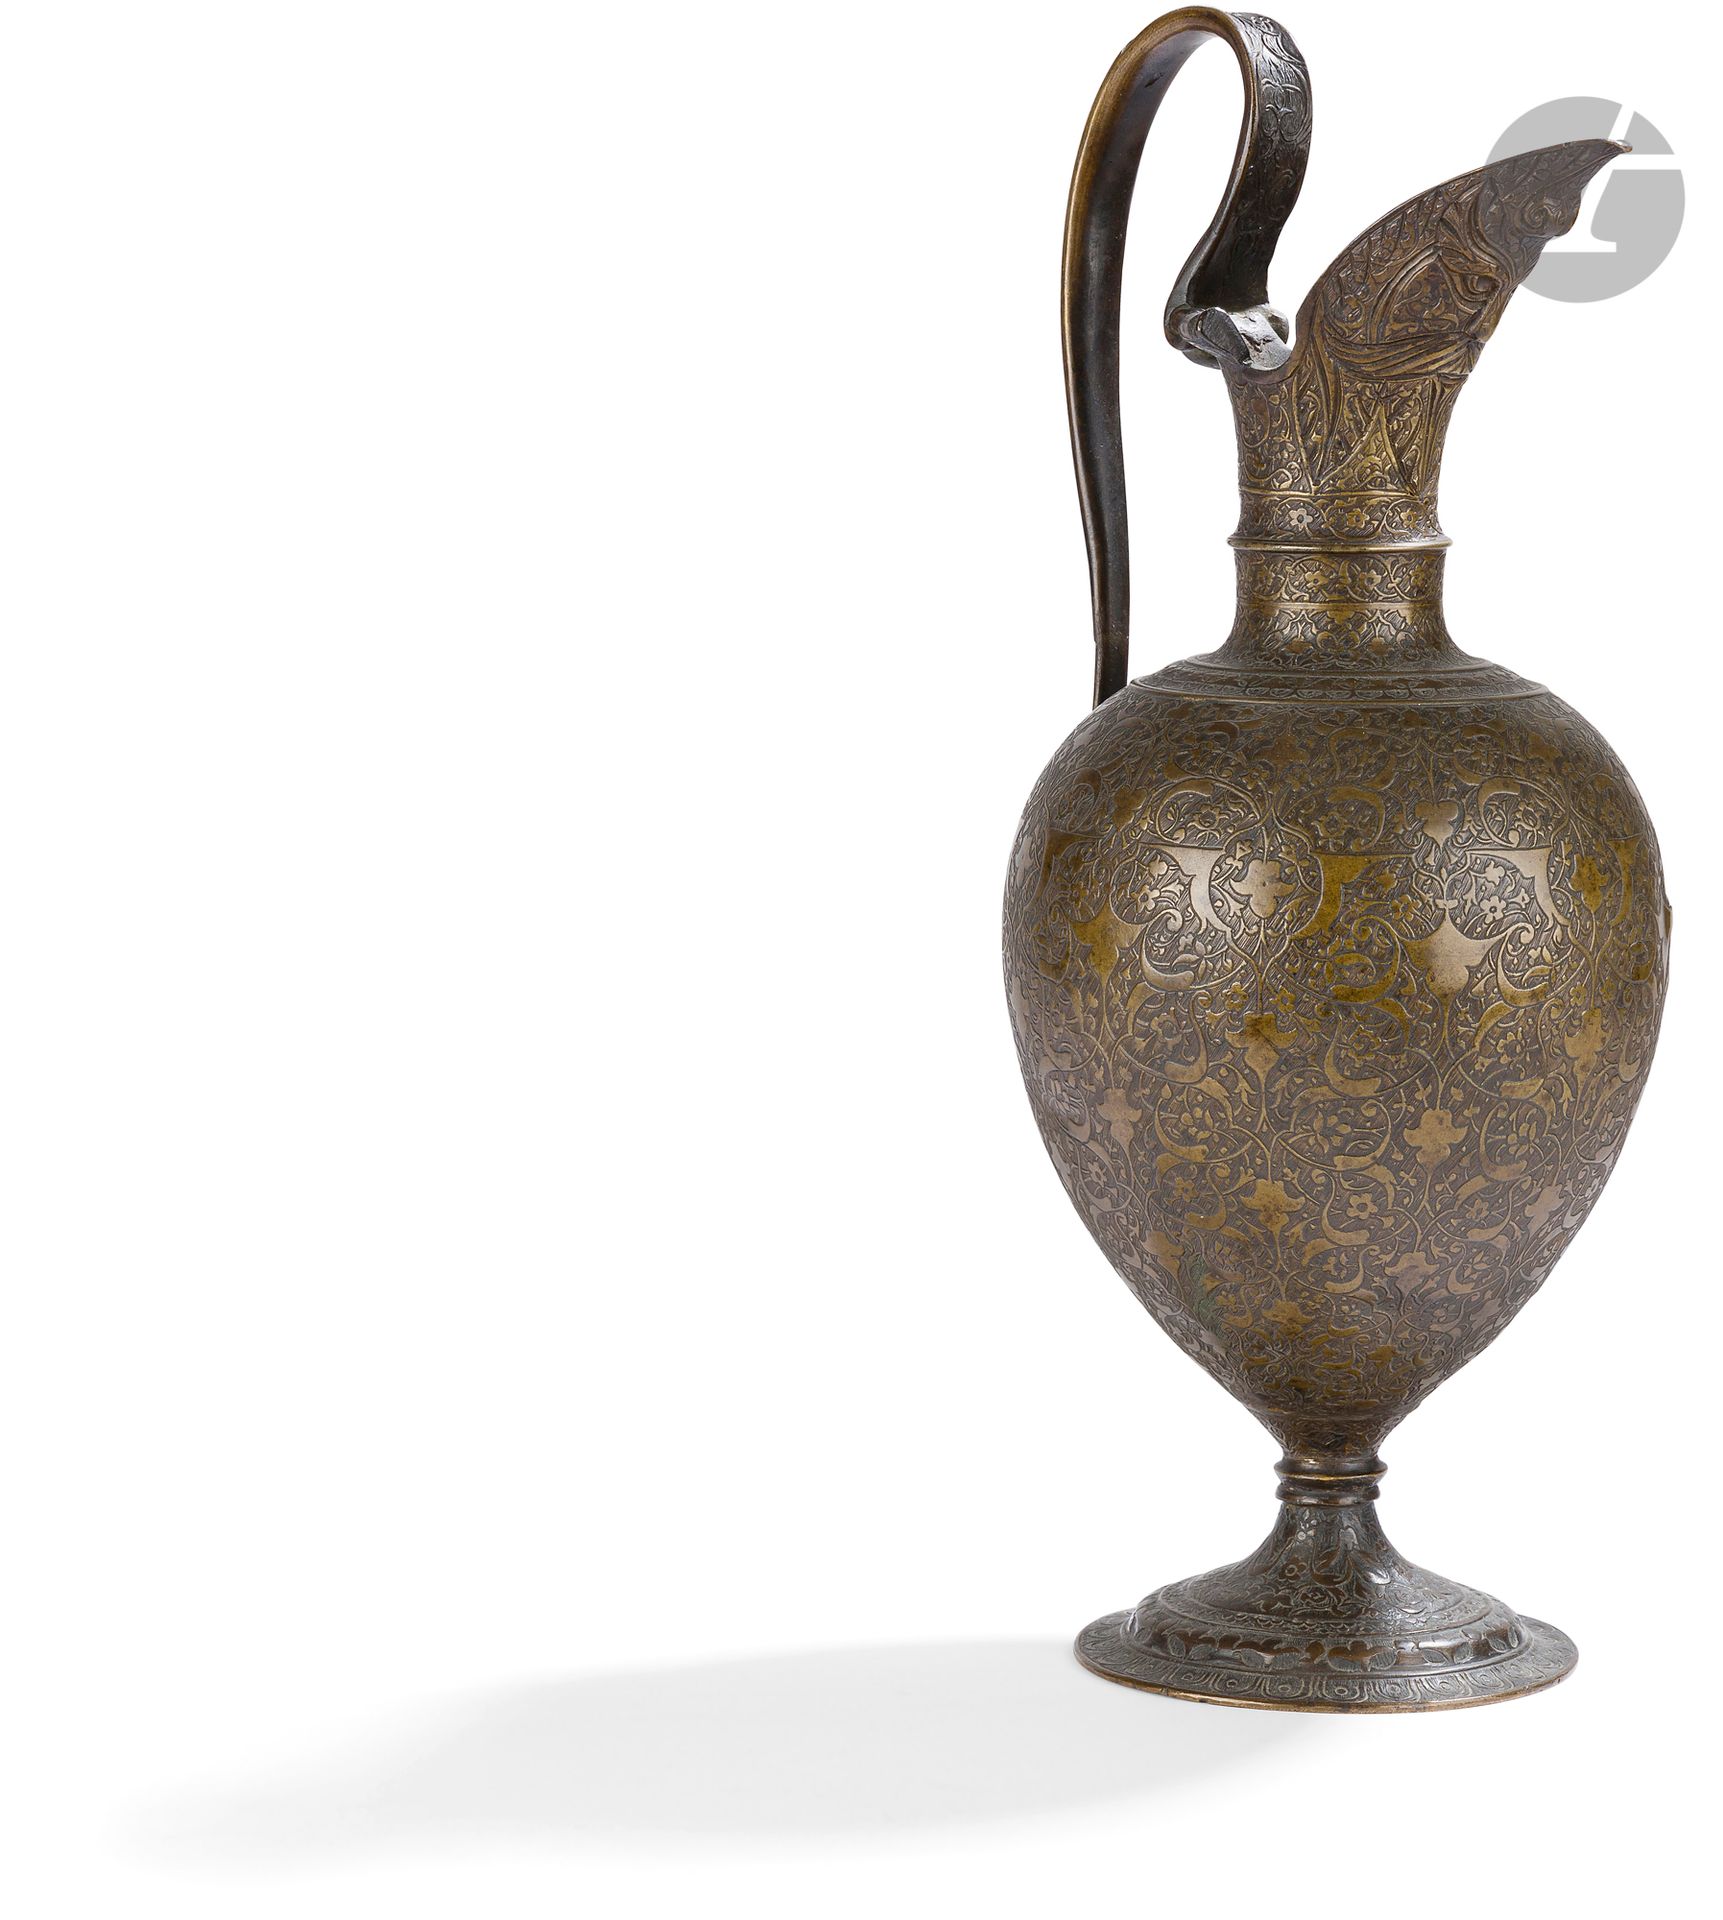 Null Composite ewer, Safavid Iran, 16th - 17th century and Europe, probably Veni&hellip;